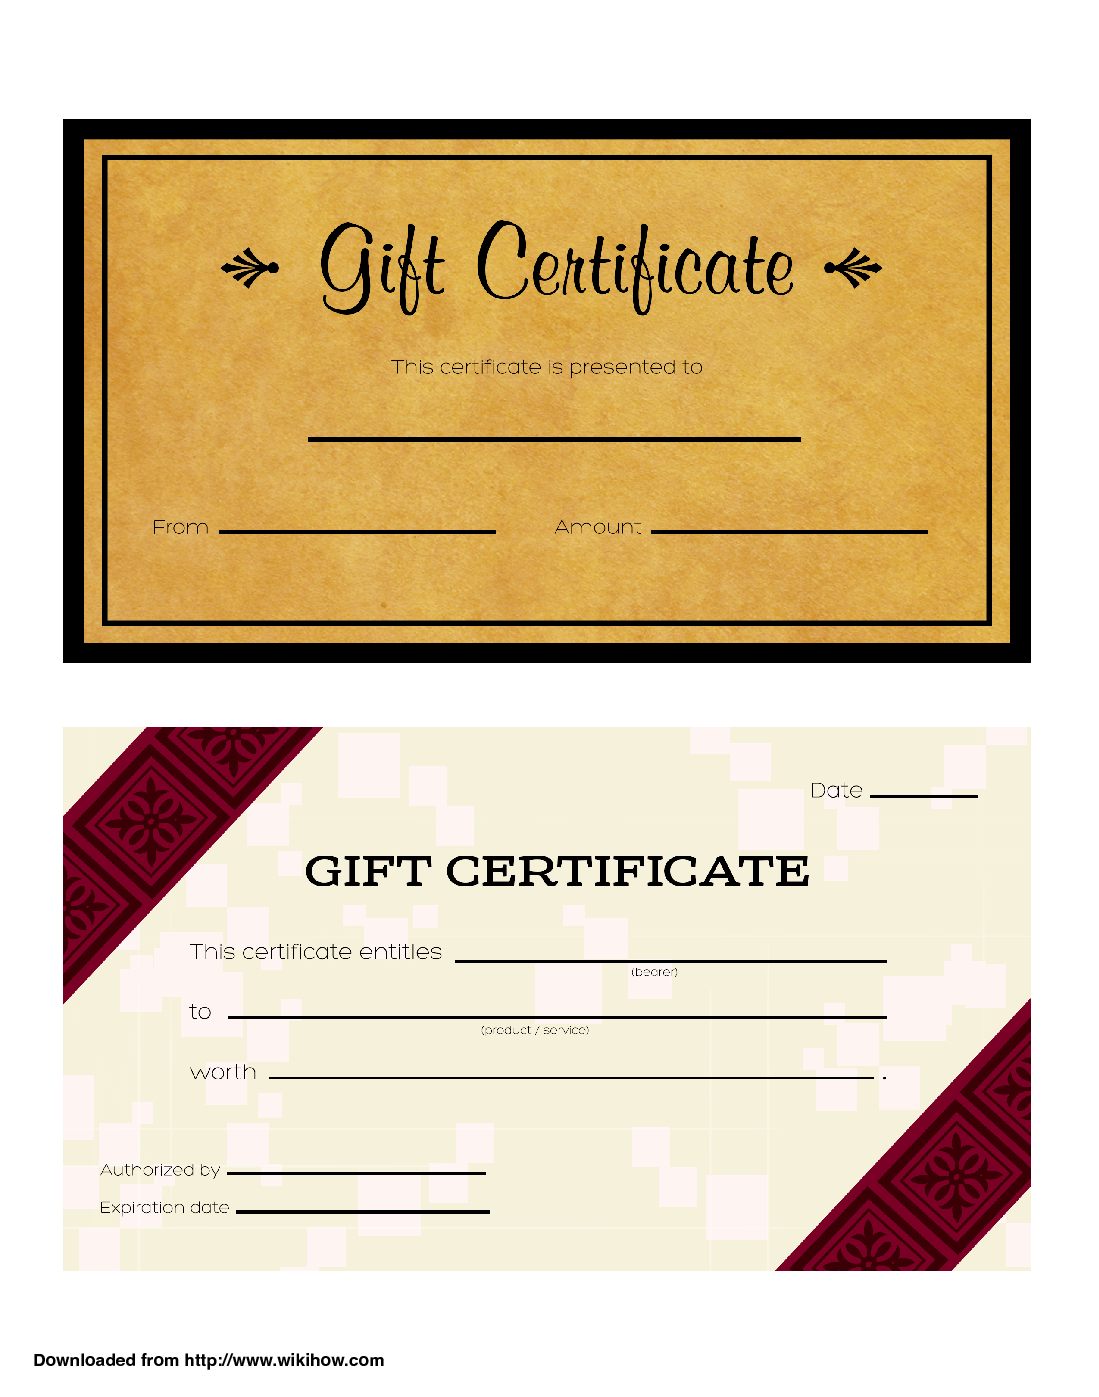 Gift Certificate Templates – Wikihow For Homemade Christmas Gift Certificates Templates